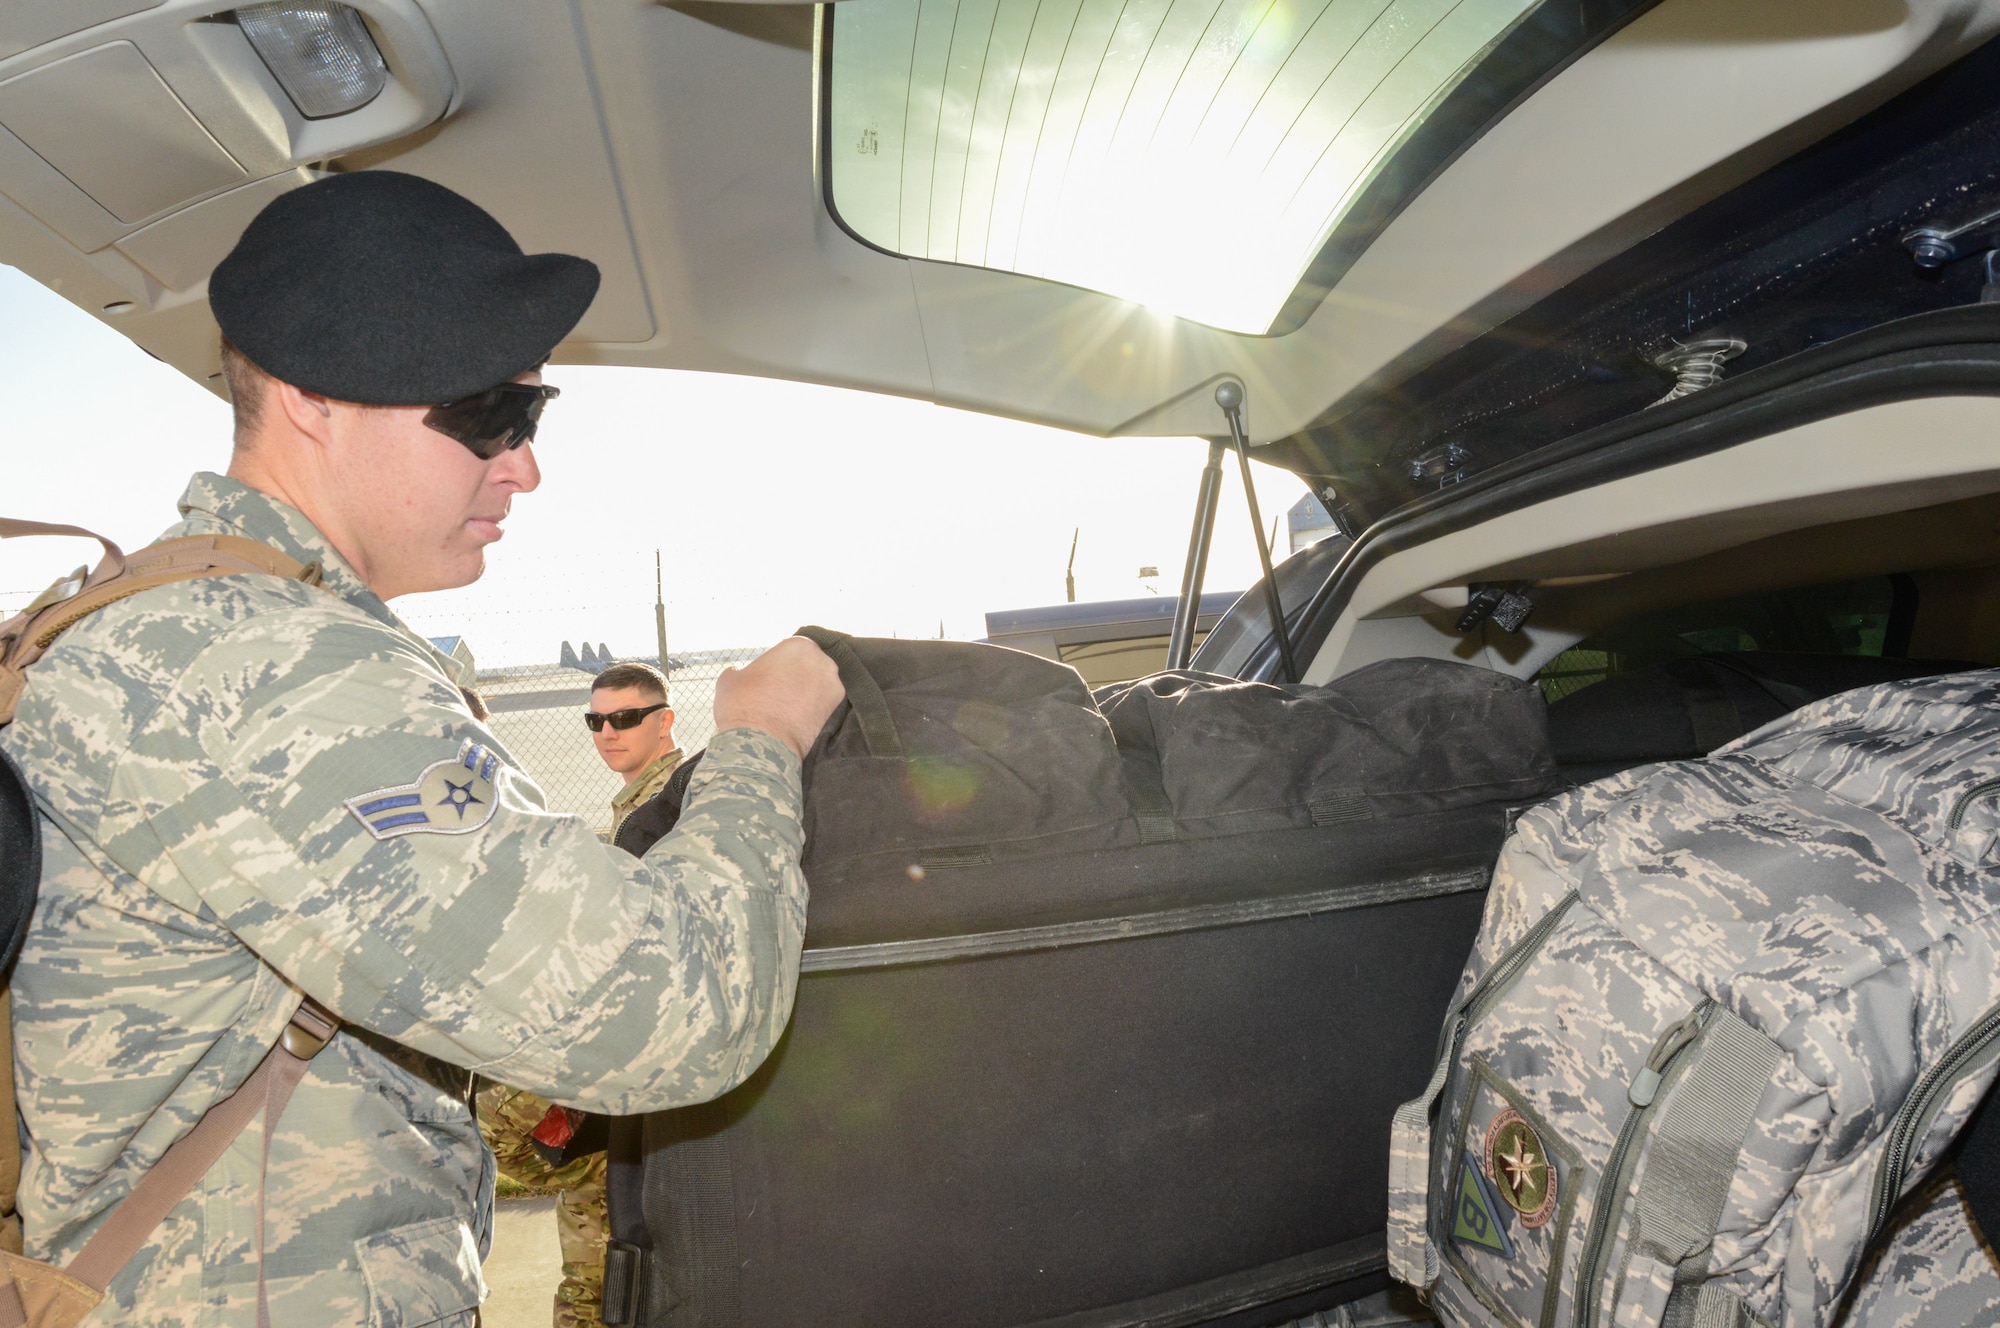 A1C Carpin, a 136th Security Forces Squadron member, loads gear to provide security in honor of former President George H. W. Bush Dec. 1, 2018, at NAS Fort Worth JRB, Texas. The Airmen augmented the 147th Security Forces Squadron to provide ceremonial support during the funeral of George H. W. Bush, the 41st President of the United States. (U.S. Air National Guard photo by Tech. Sgt. Lynn M. Means)